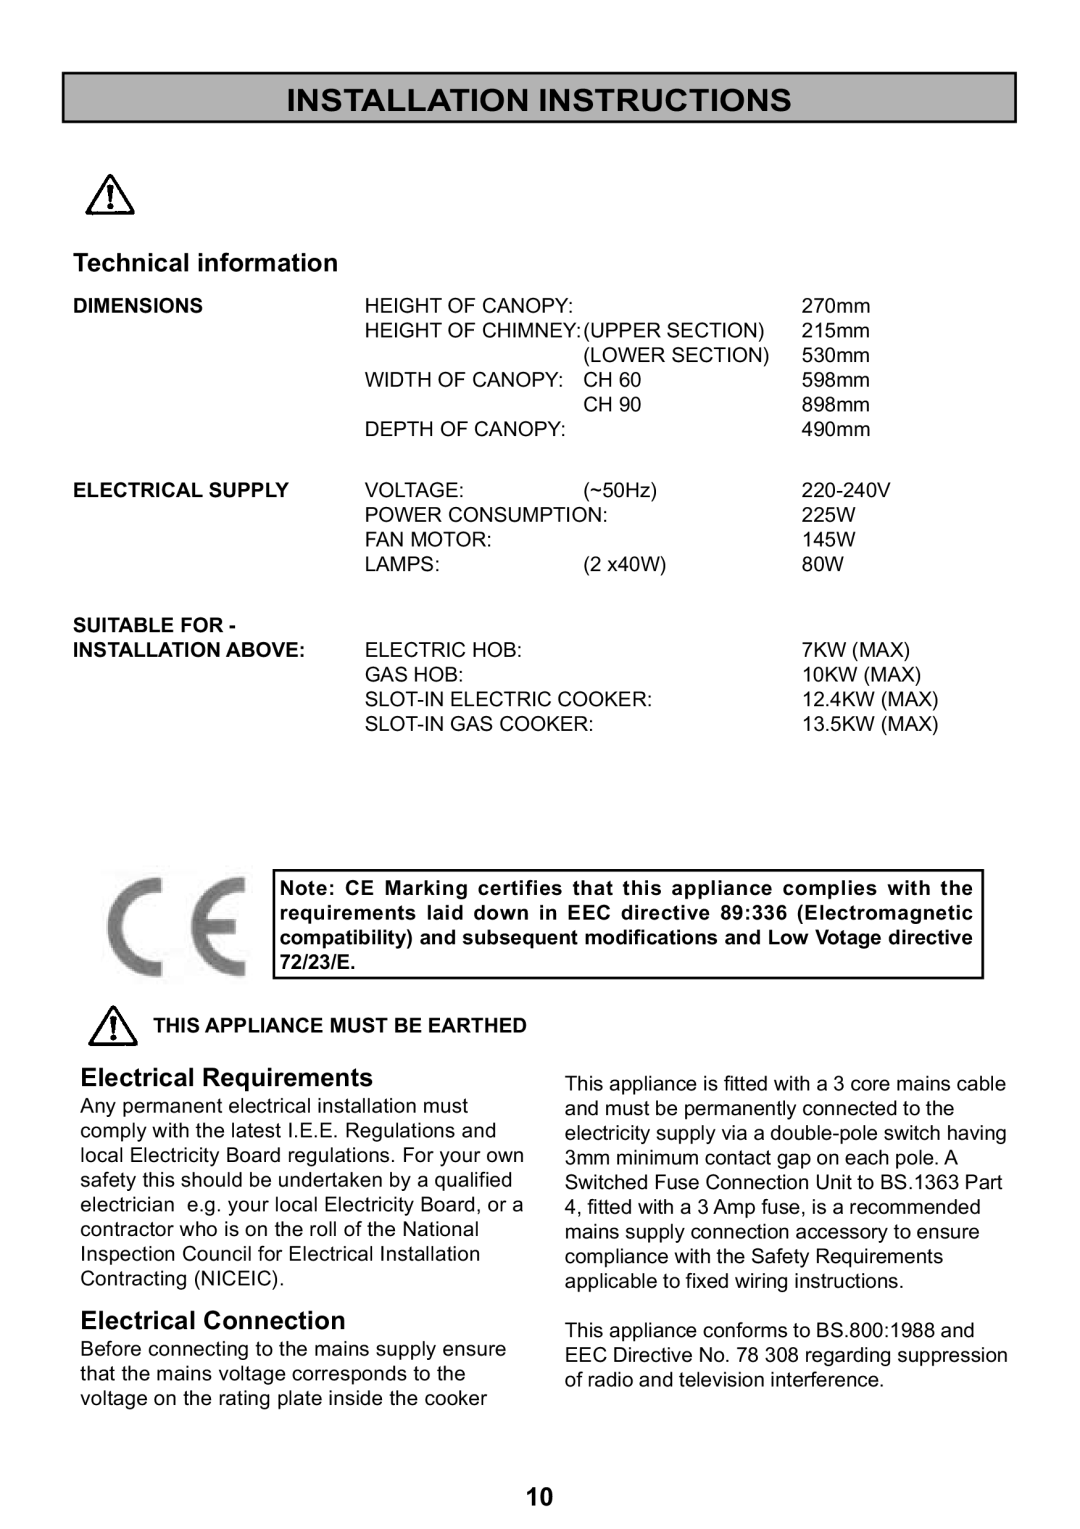 Zanussi CH90, CH60 manual Installation Instructions, Dimensions, Electrical Supply, Suitable For, Installation Above 